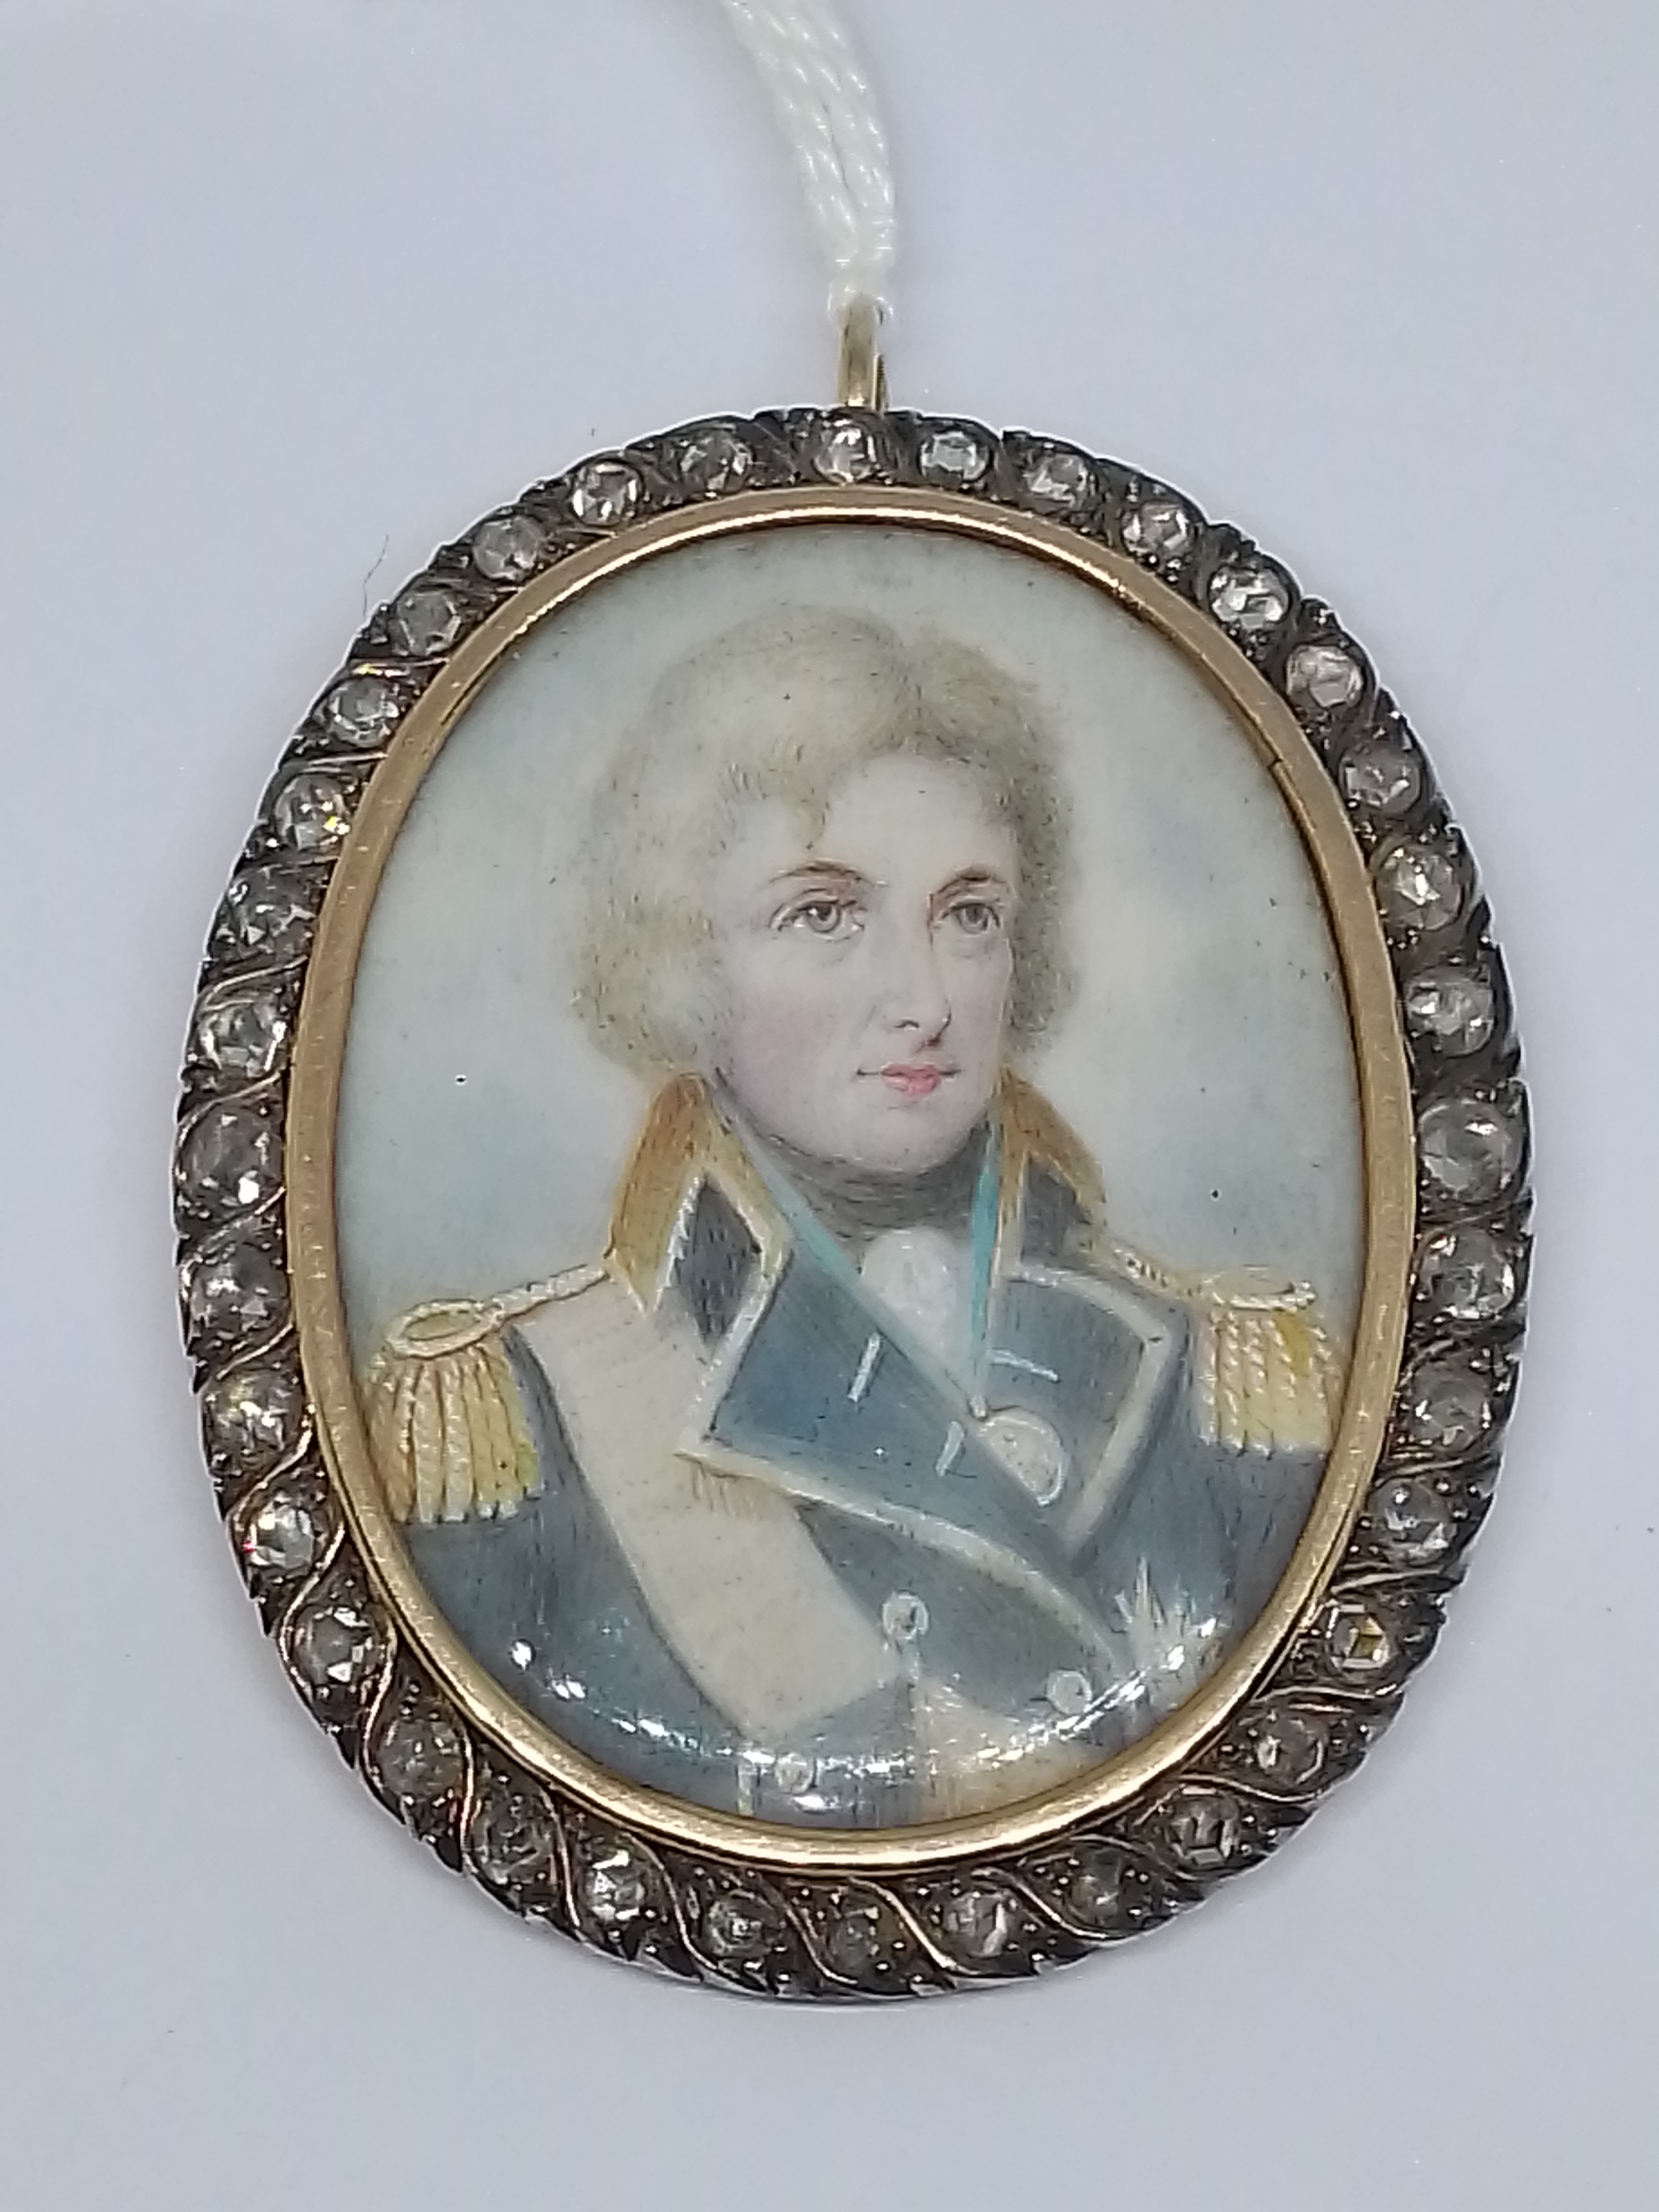 A late 18th century portrait miniature on ivory, circa 1790, depicting Lord Nelson, surrounded by - Image 7 of 7